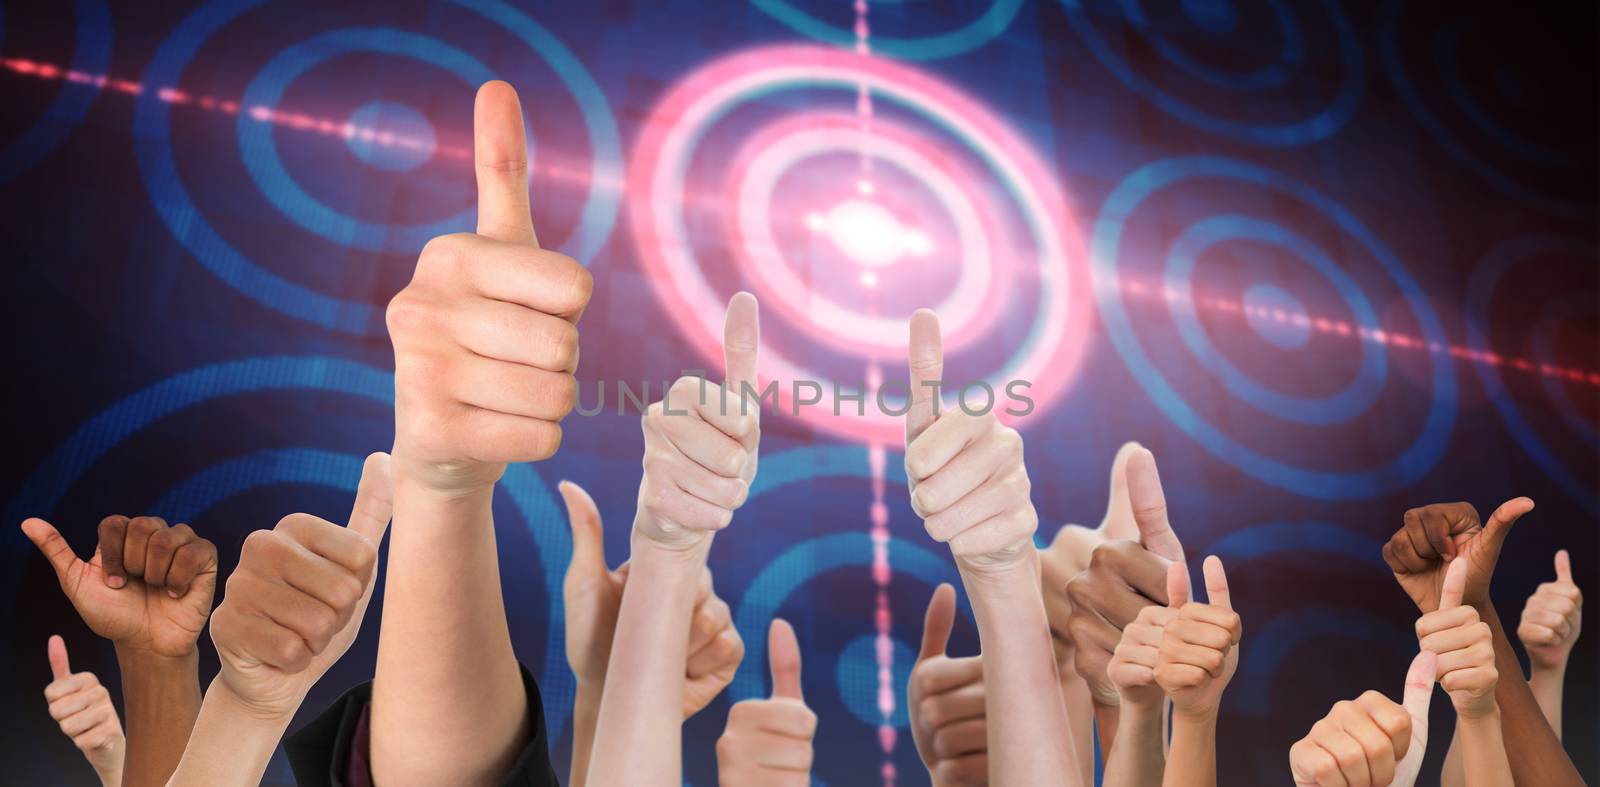 Hands showing thumbs up against digital target over computing design